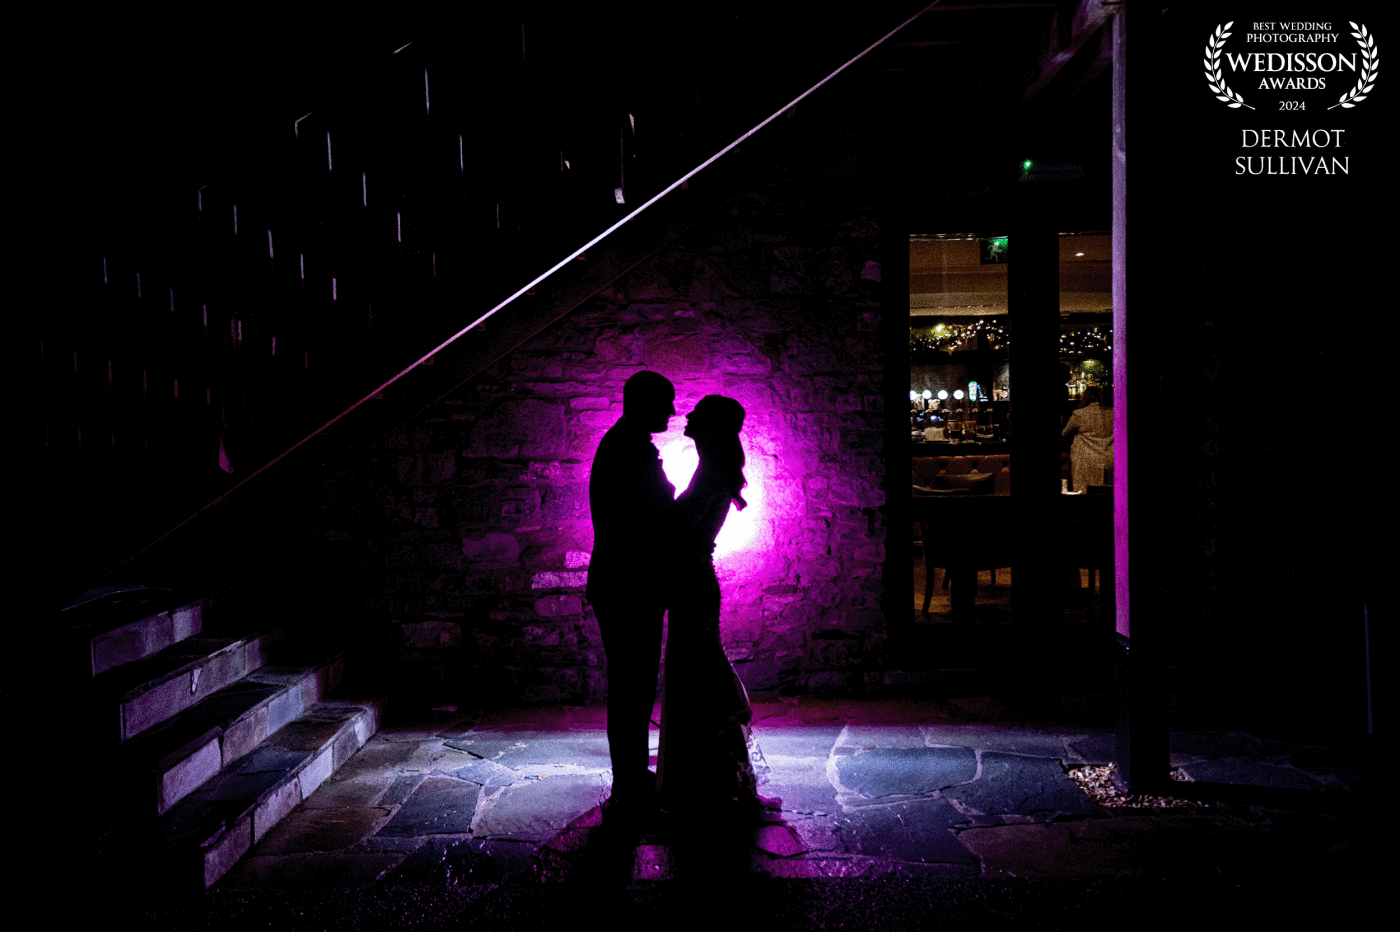 We had about 10 minutes before the couple went in for dinner and I found a couple of places around the venue that would work for a night shot. Luckily it was December in Ireland so it dark at 4.30. I put a flash with a Magmod gel & grid behind my couple and hey presto!